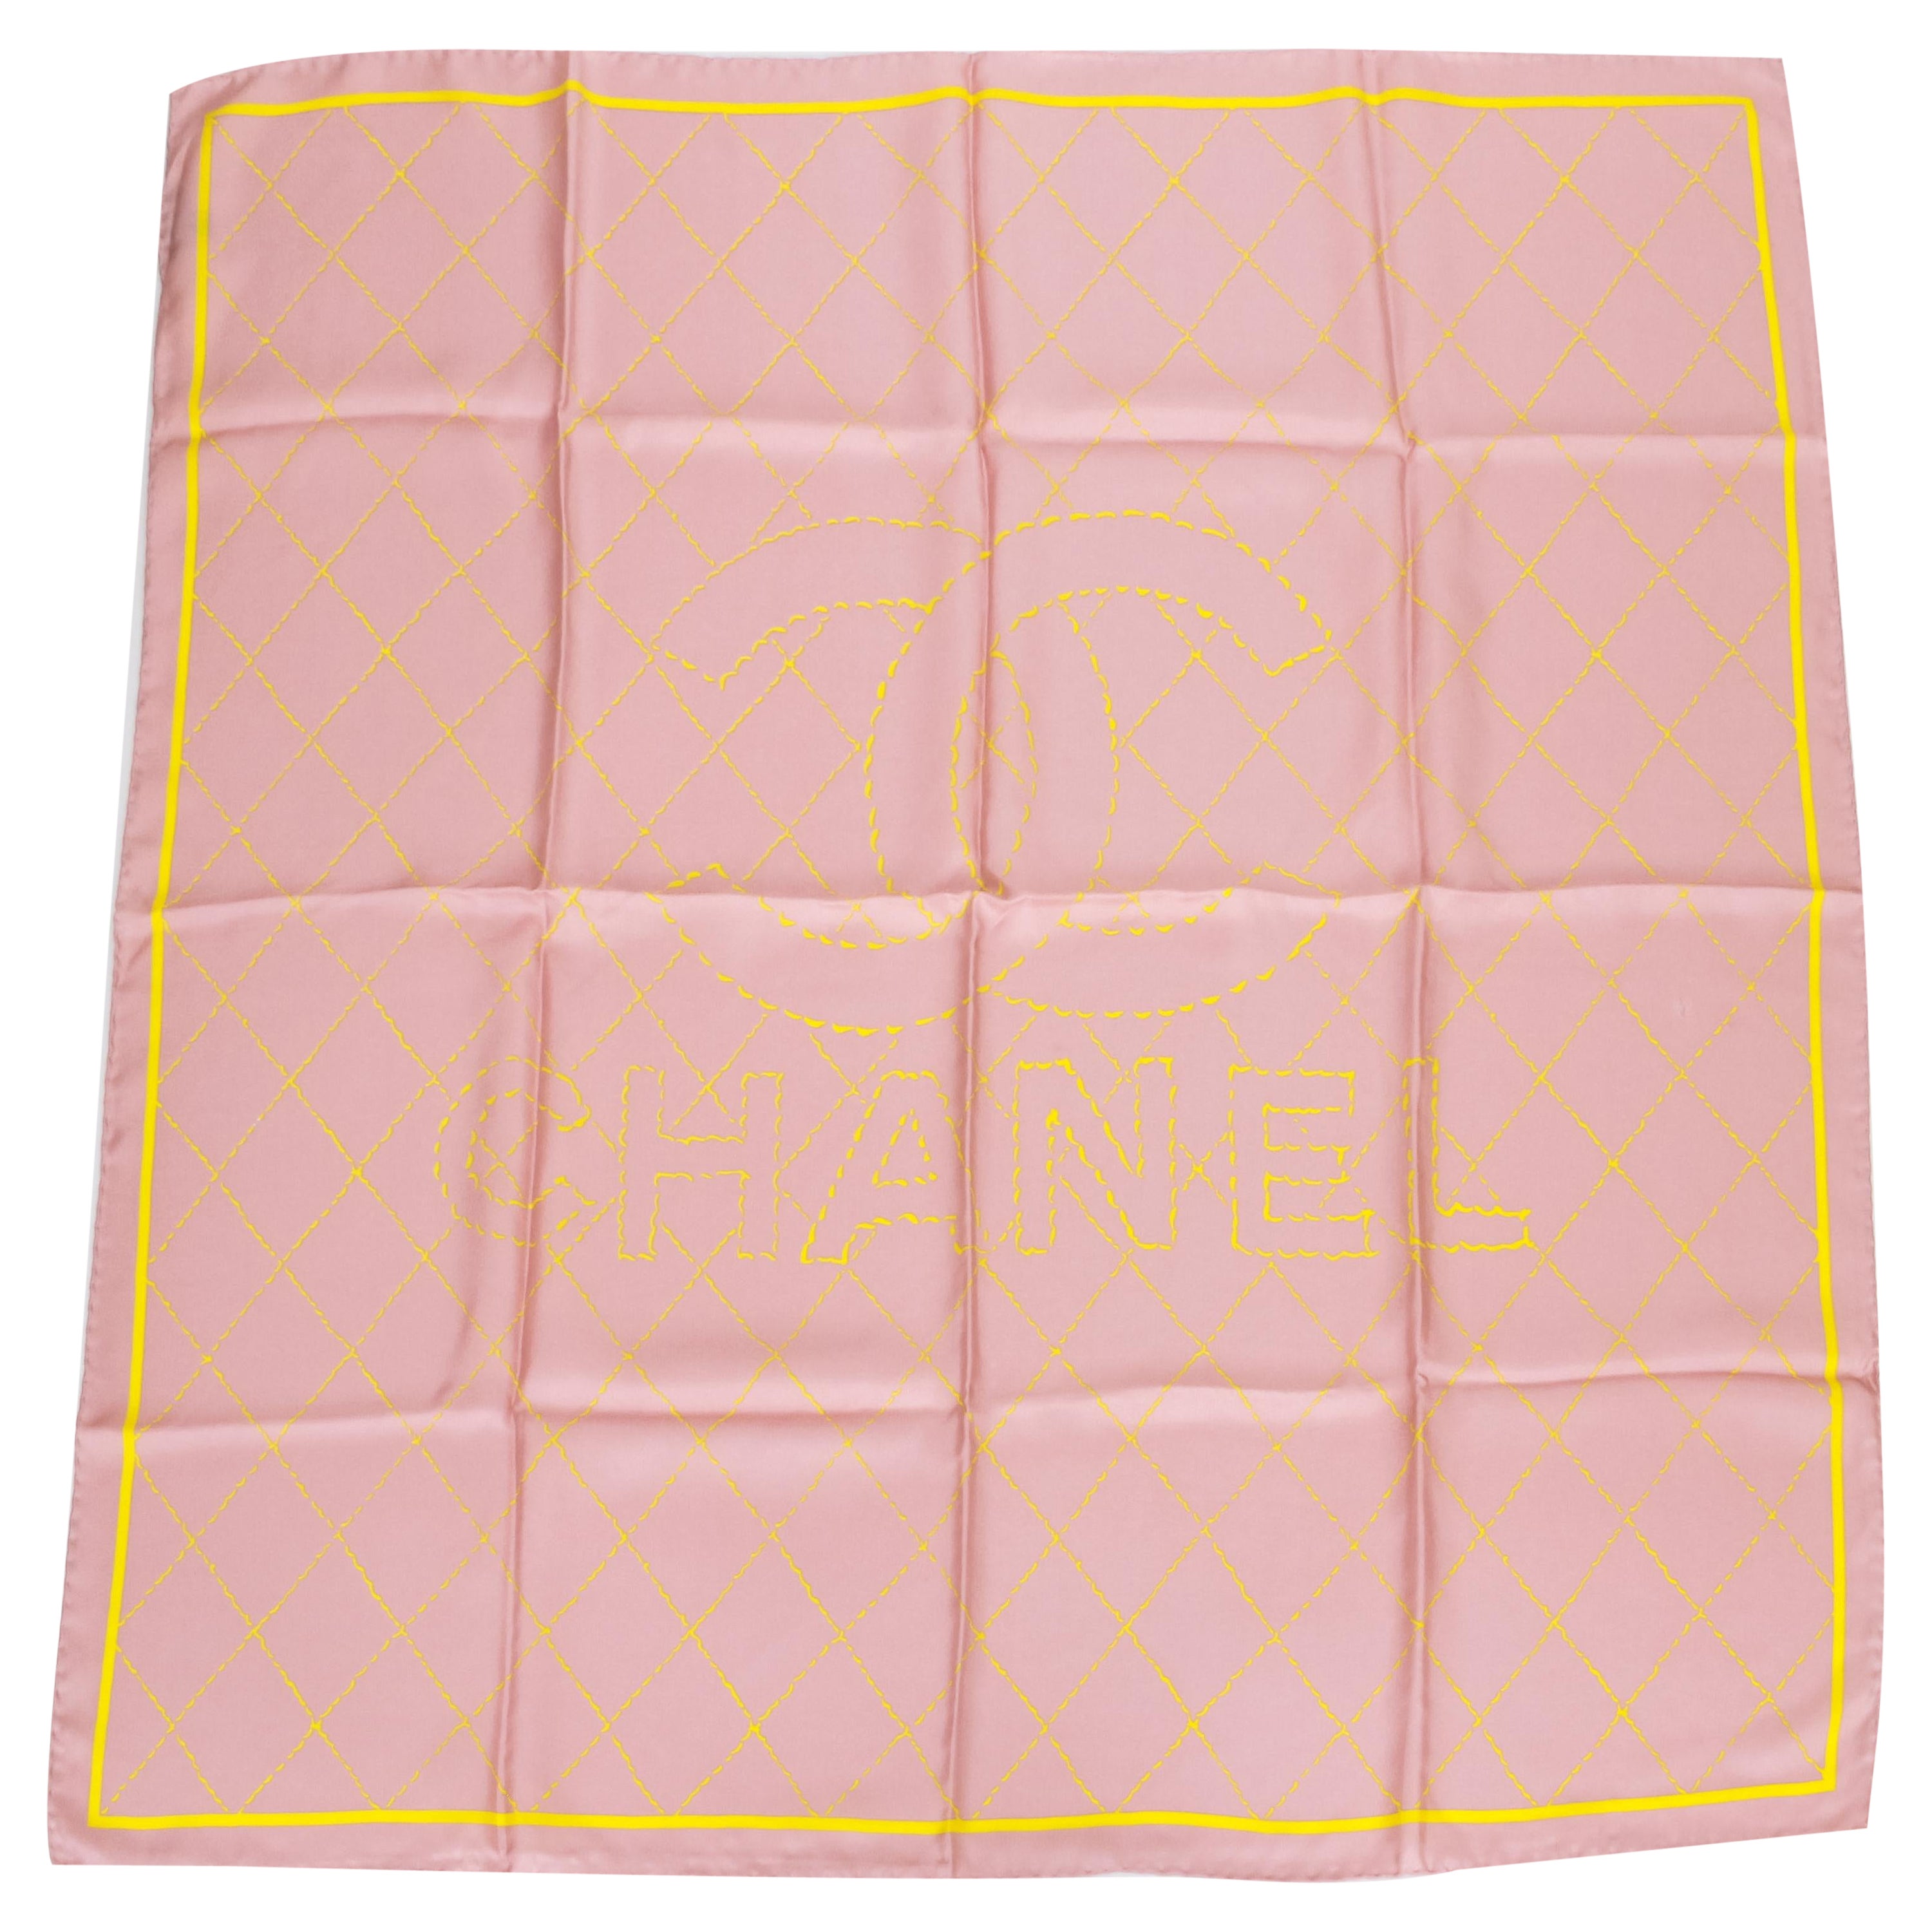 New Chanel Pink and Yellow Quilted Scarf (écharpe matelassée rose et jaune) en vente